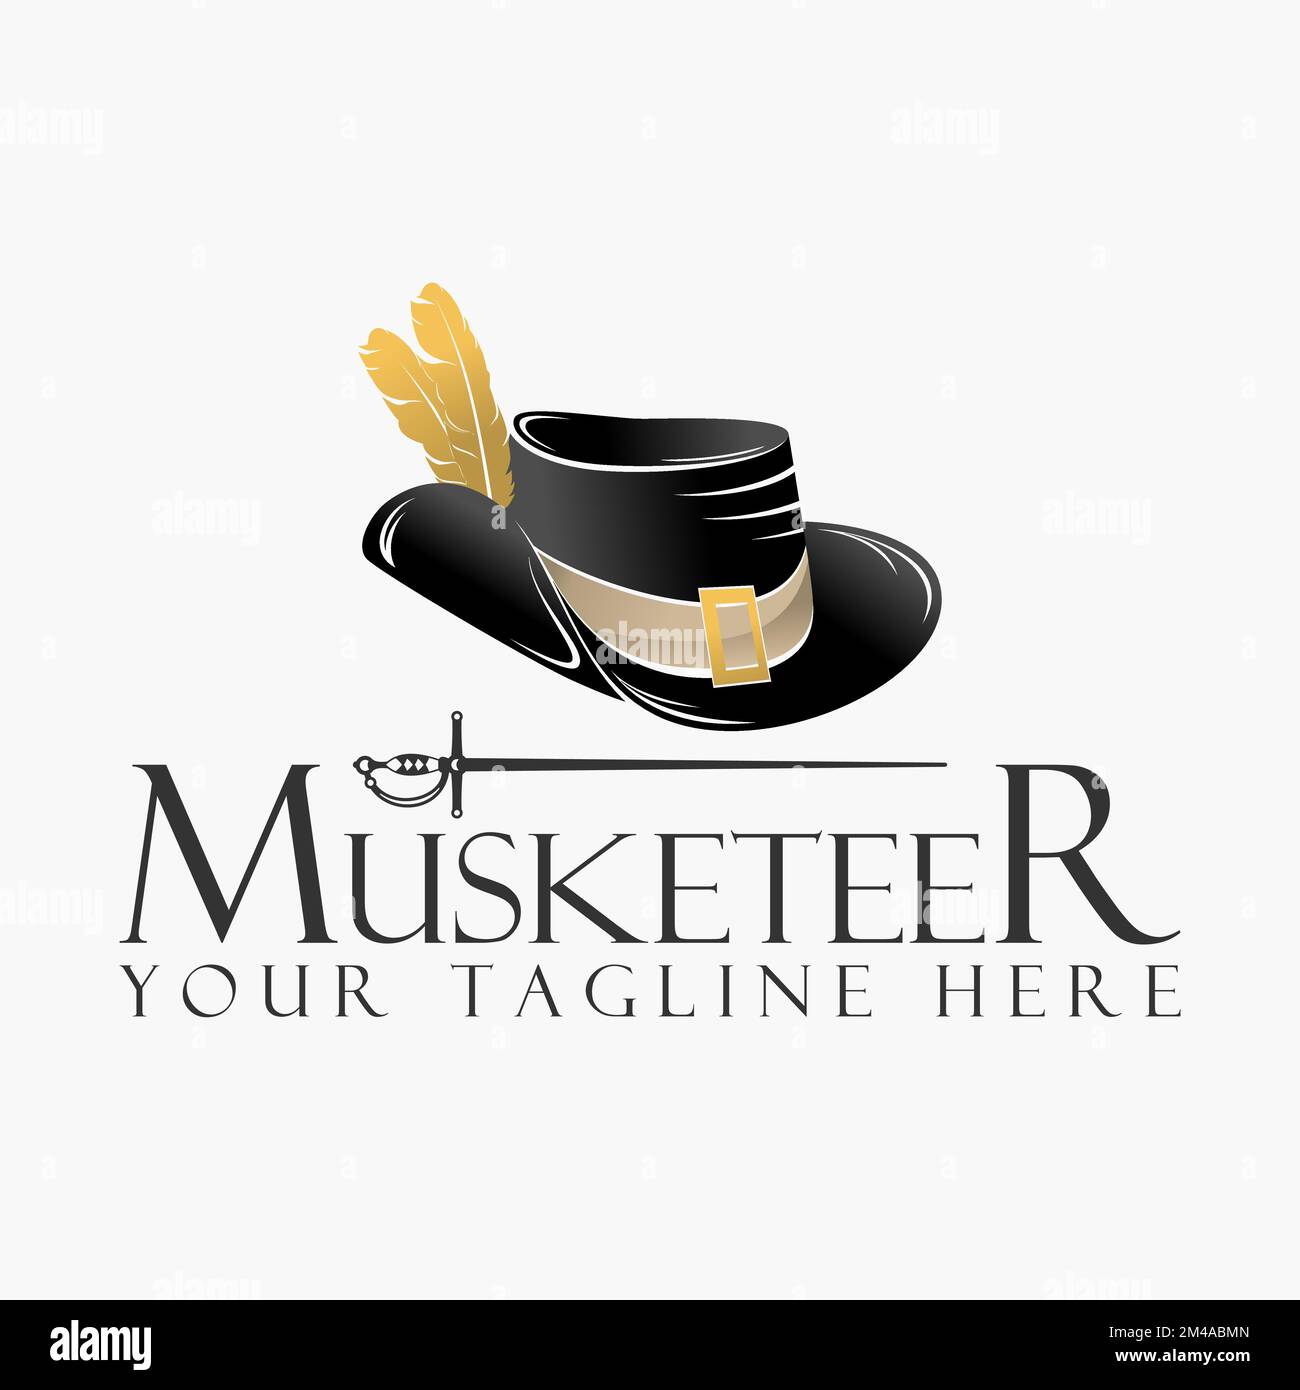 Musketeer hat with fur and sword image graphic icon logo design abstract concept vector stock. Can be used as a symbol related to cowboy. Stock Vector